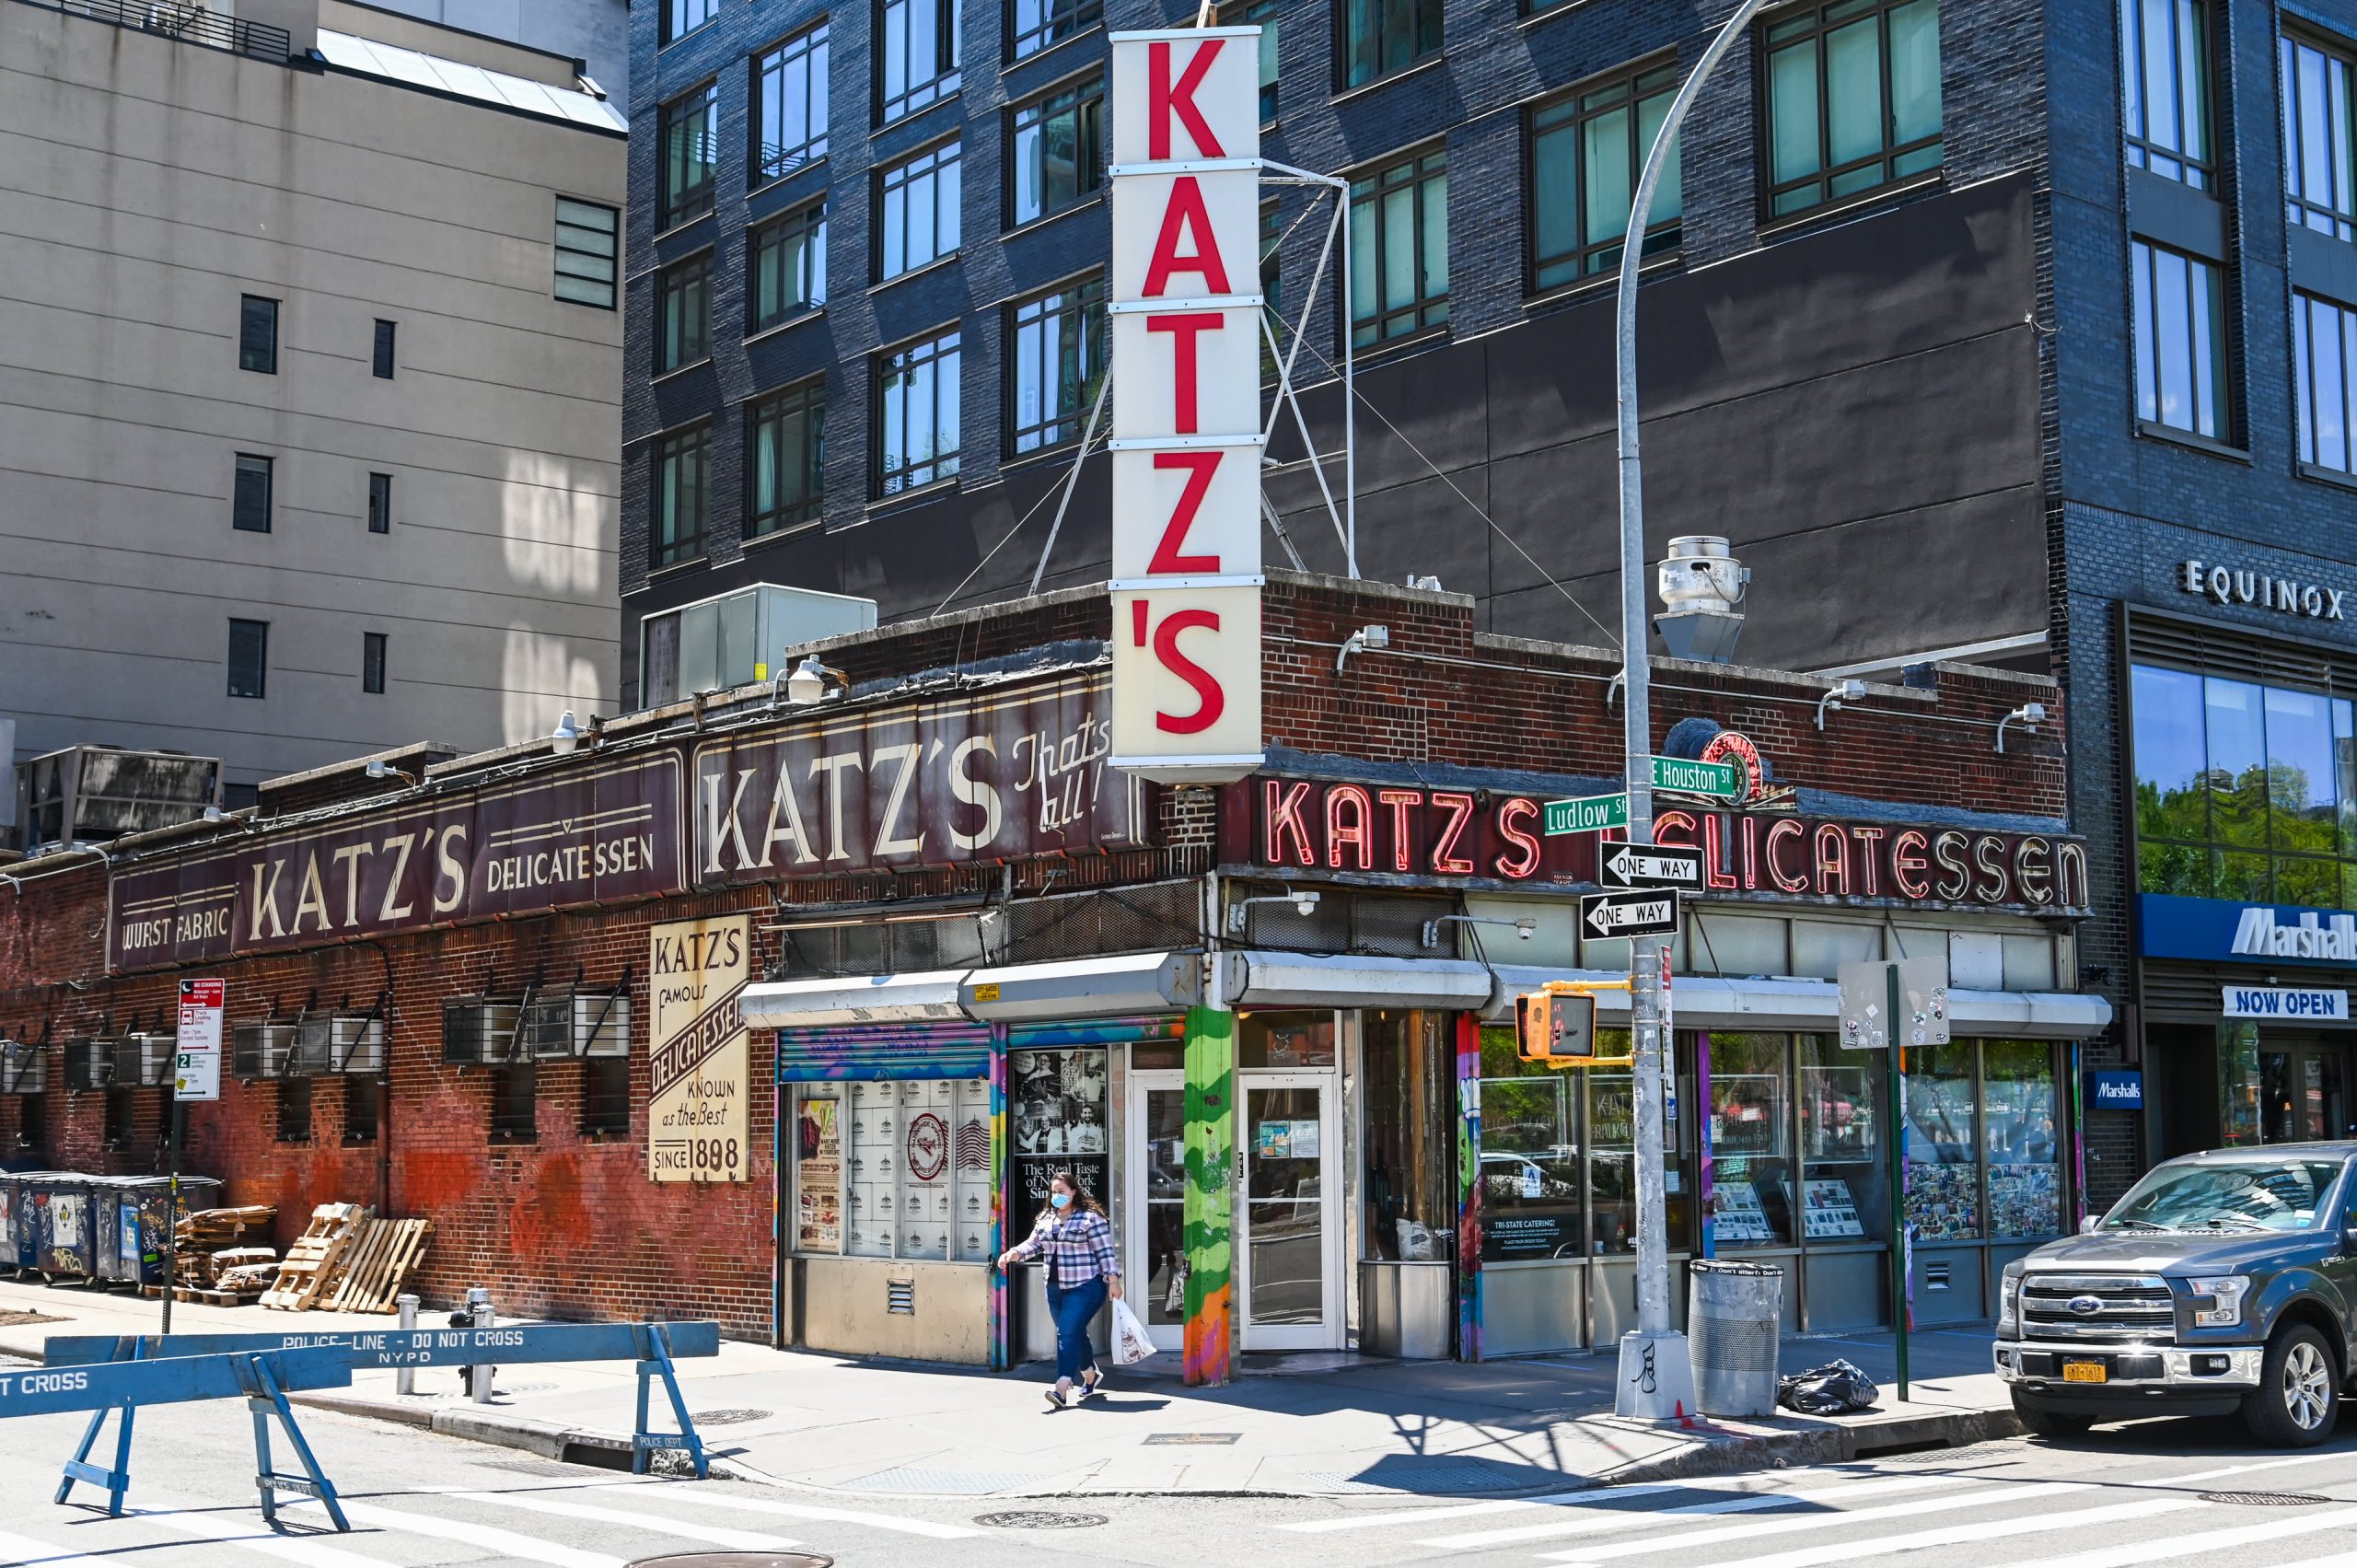 Katz’s deli survived the 1918 pandemic. Now, it is navigating Covid